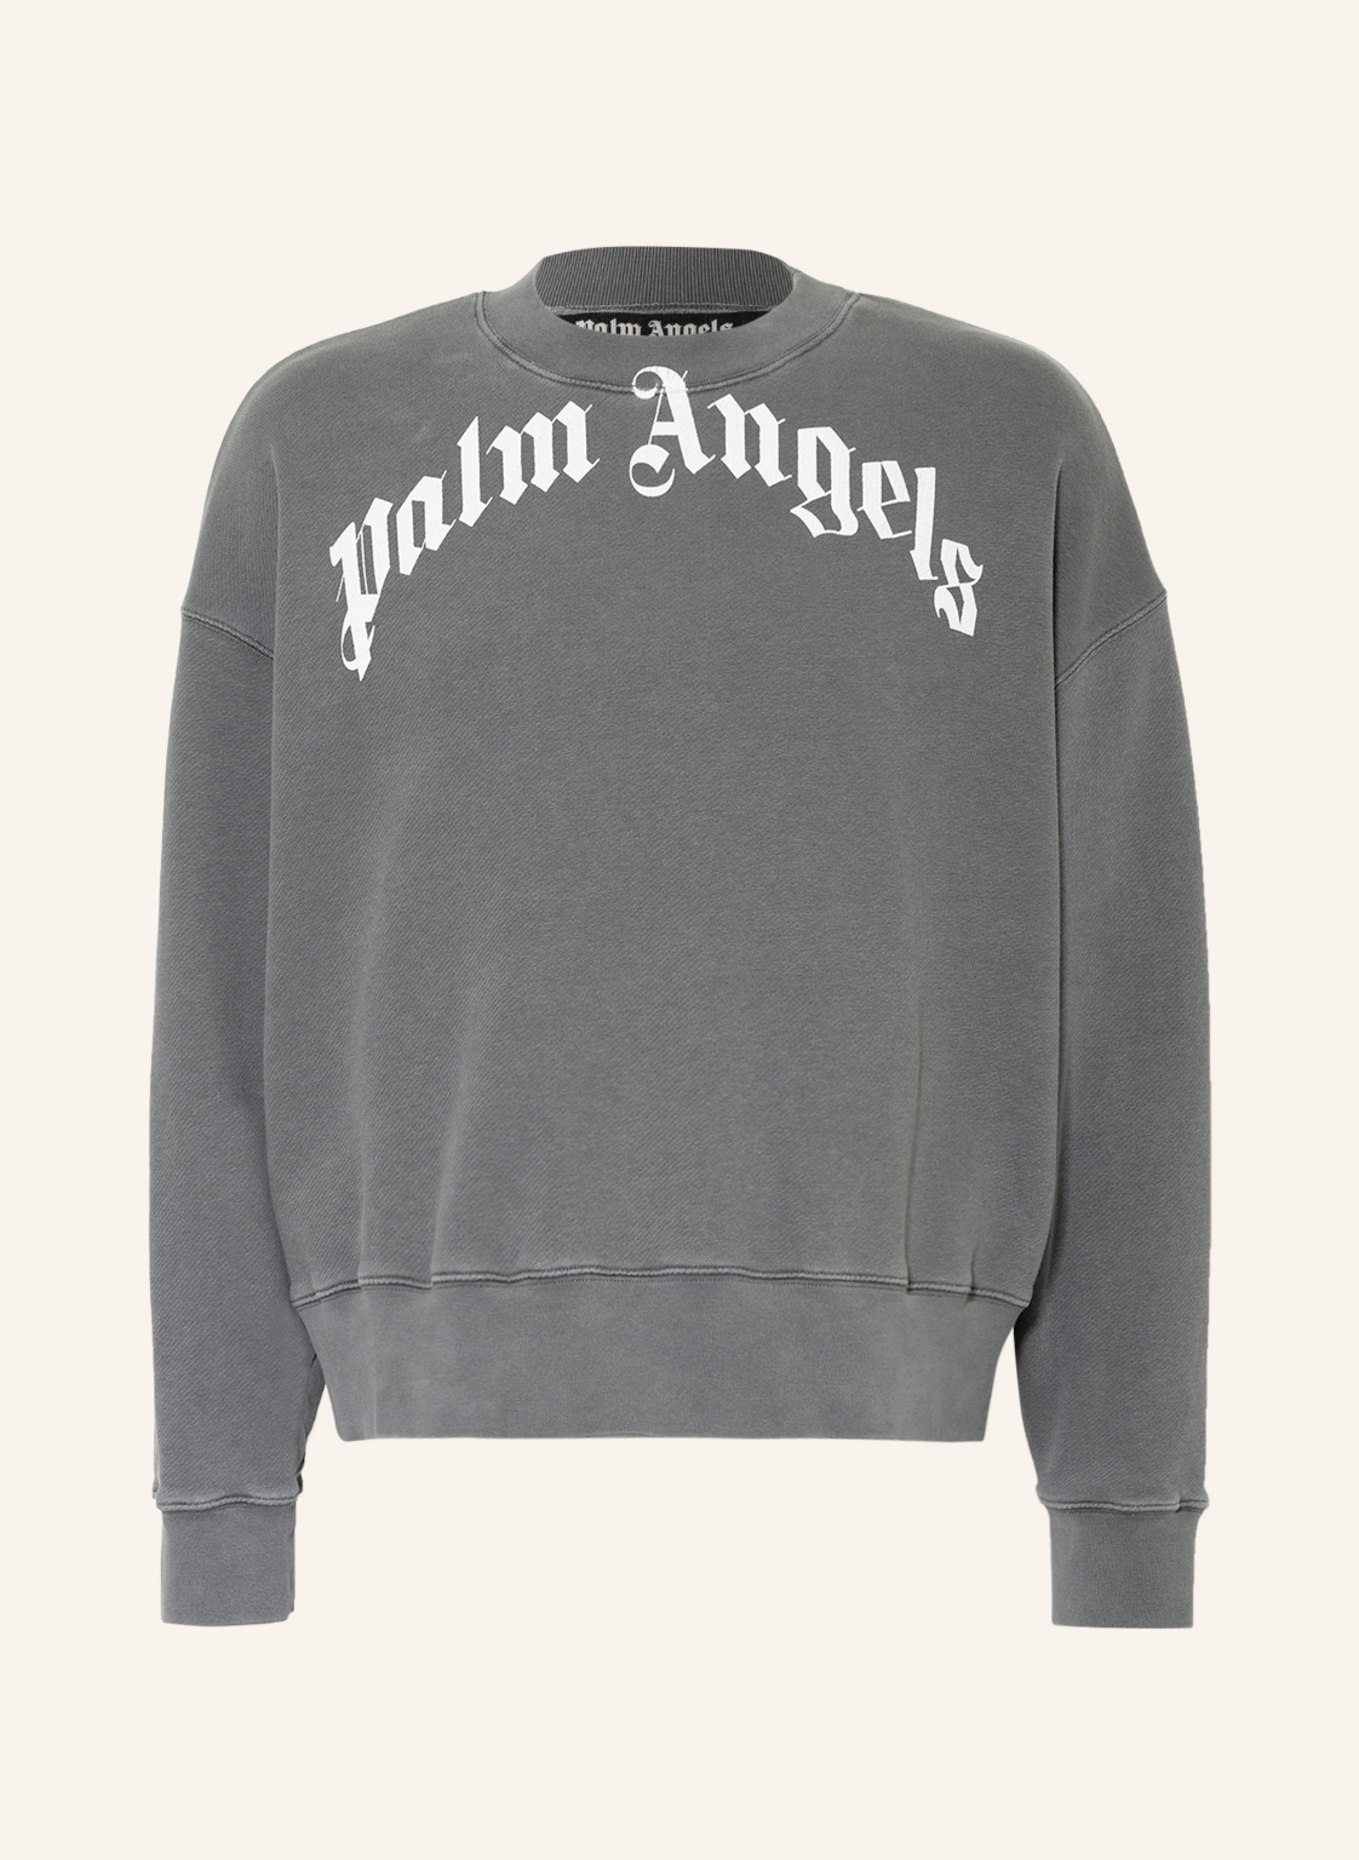 Palm Angels to open a pop-up shop at Central Embassy in August